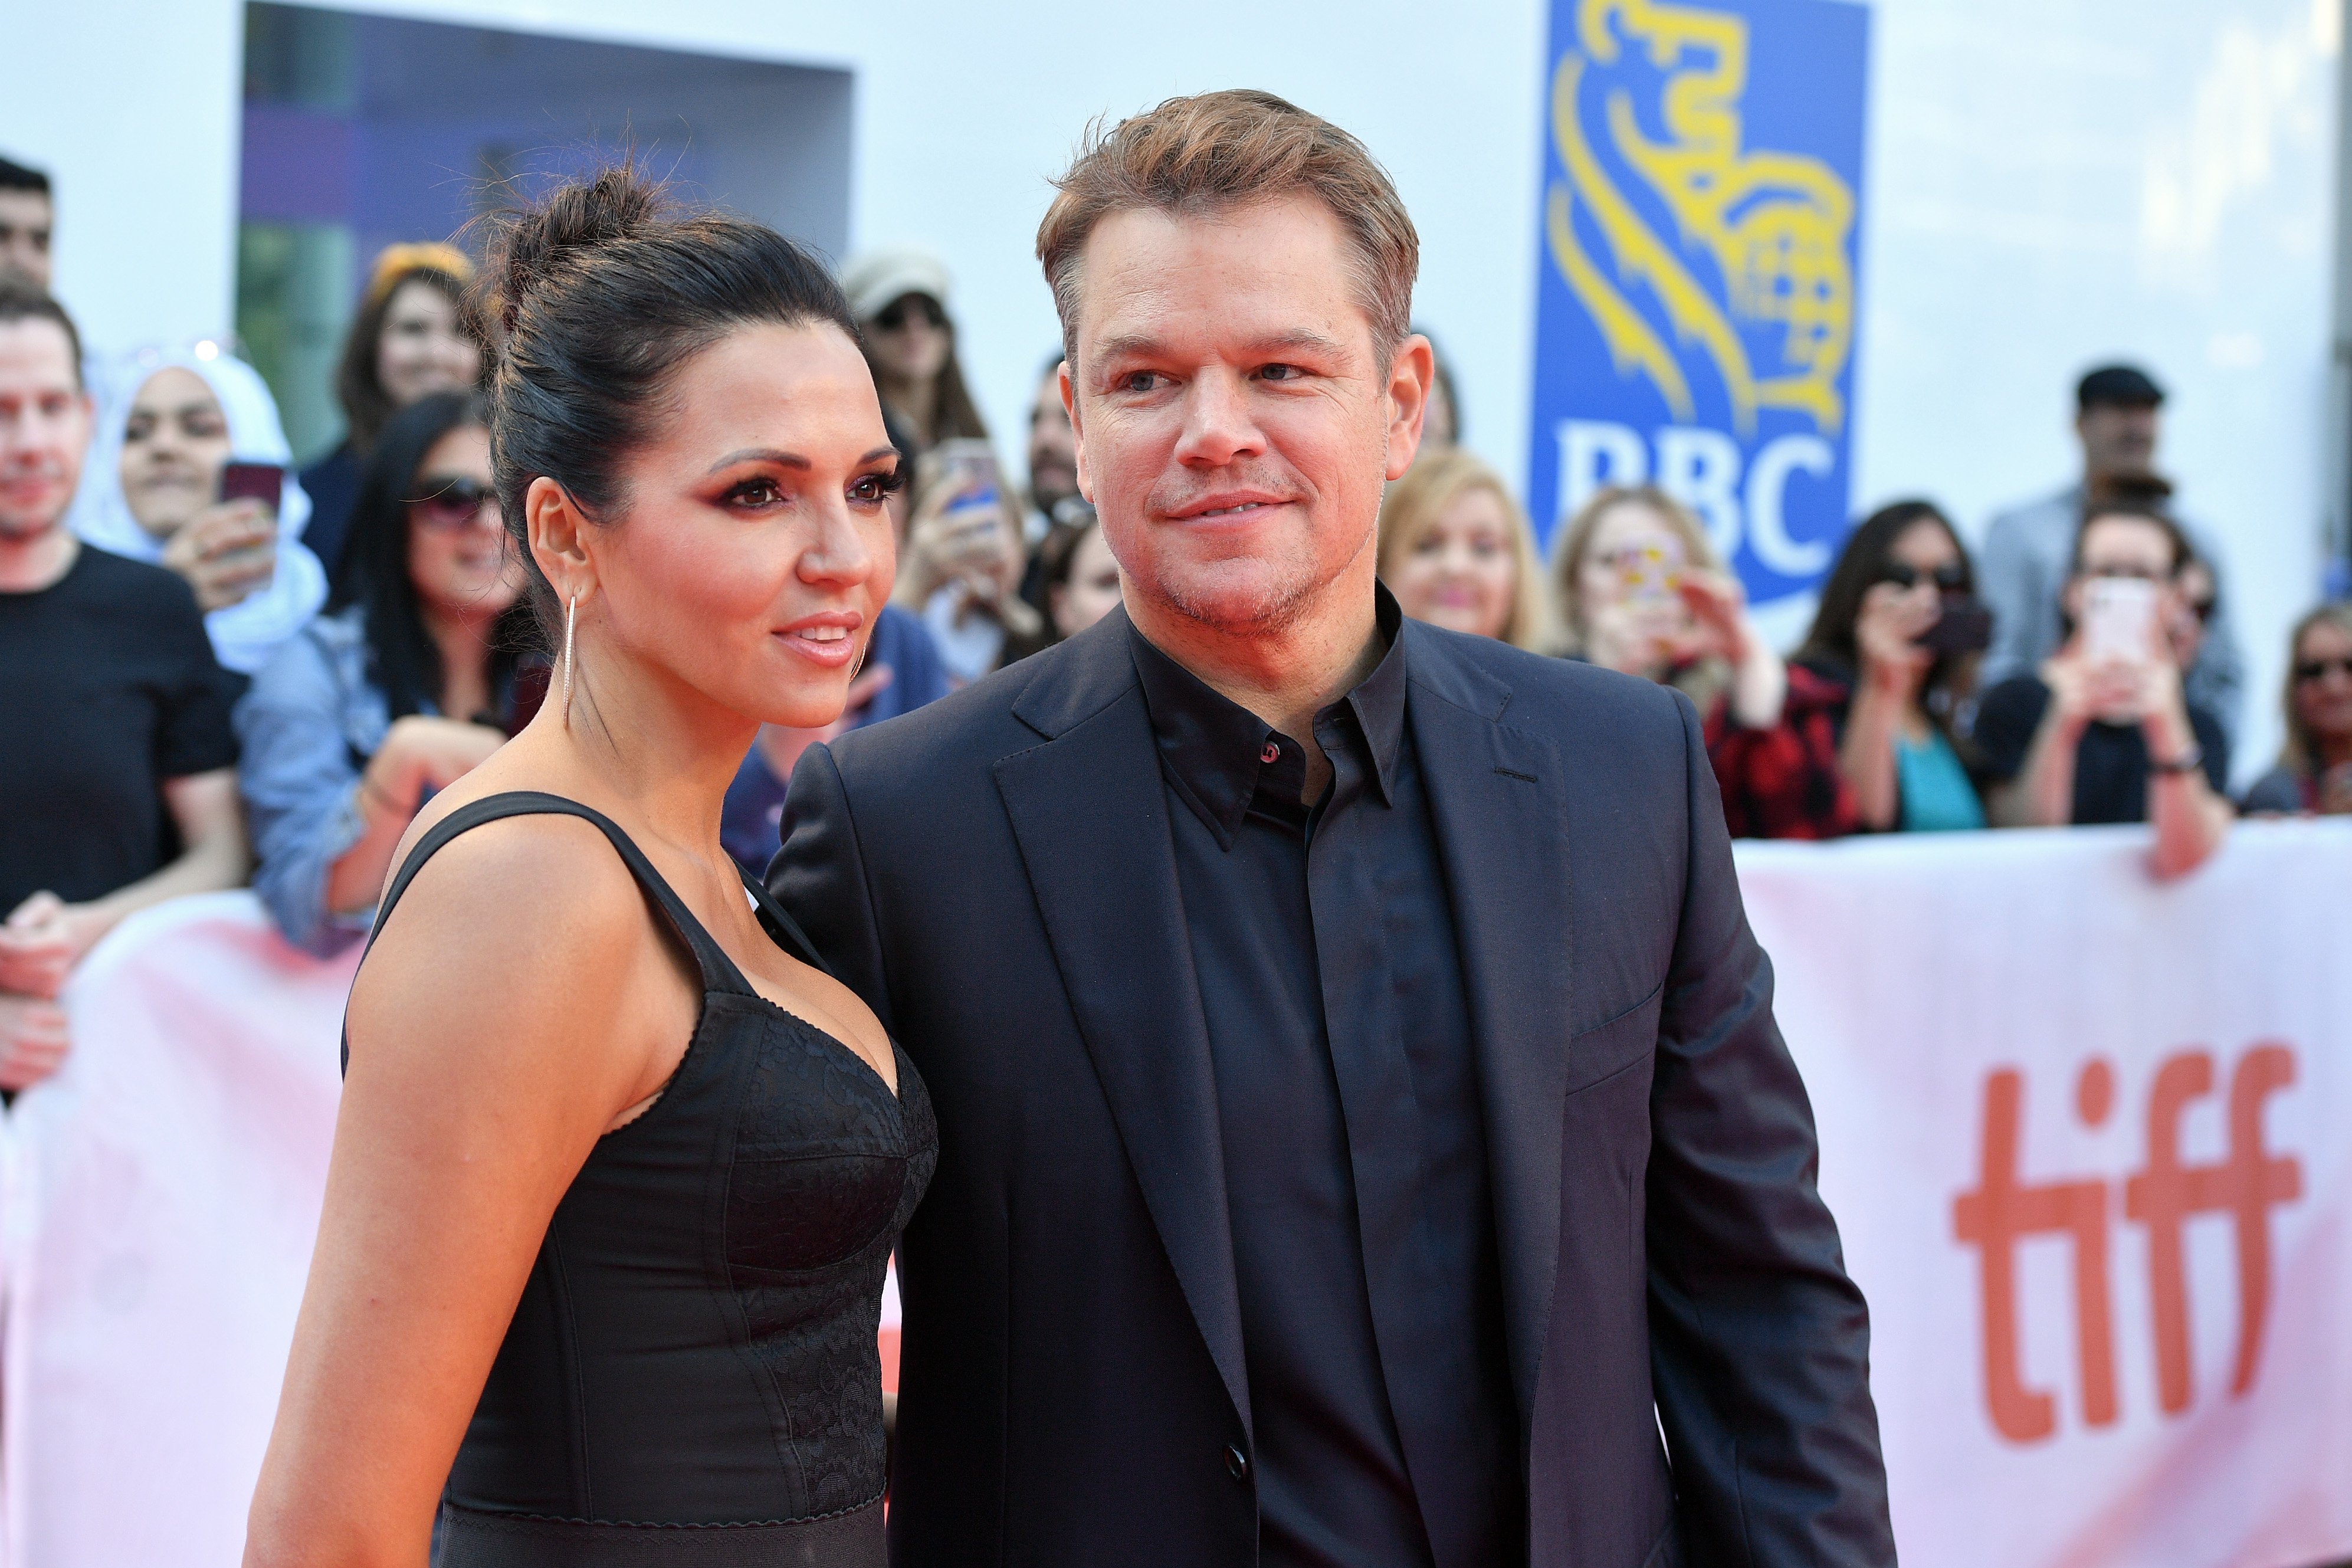 Luciana Barroso and Matt Damon attend the "Ford v Ferrari" premiere during the 2019 Toronto International Film Festival at Roy Thomson Hall on September 09, 2019  | Source: Getty Images